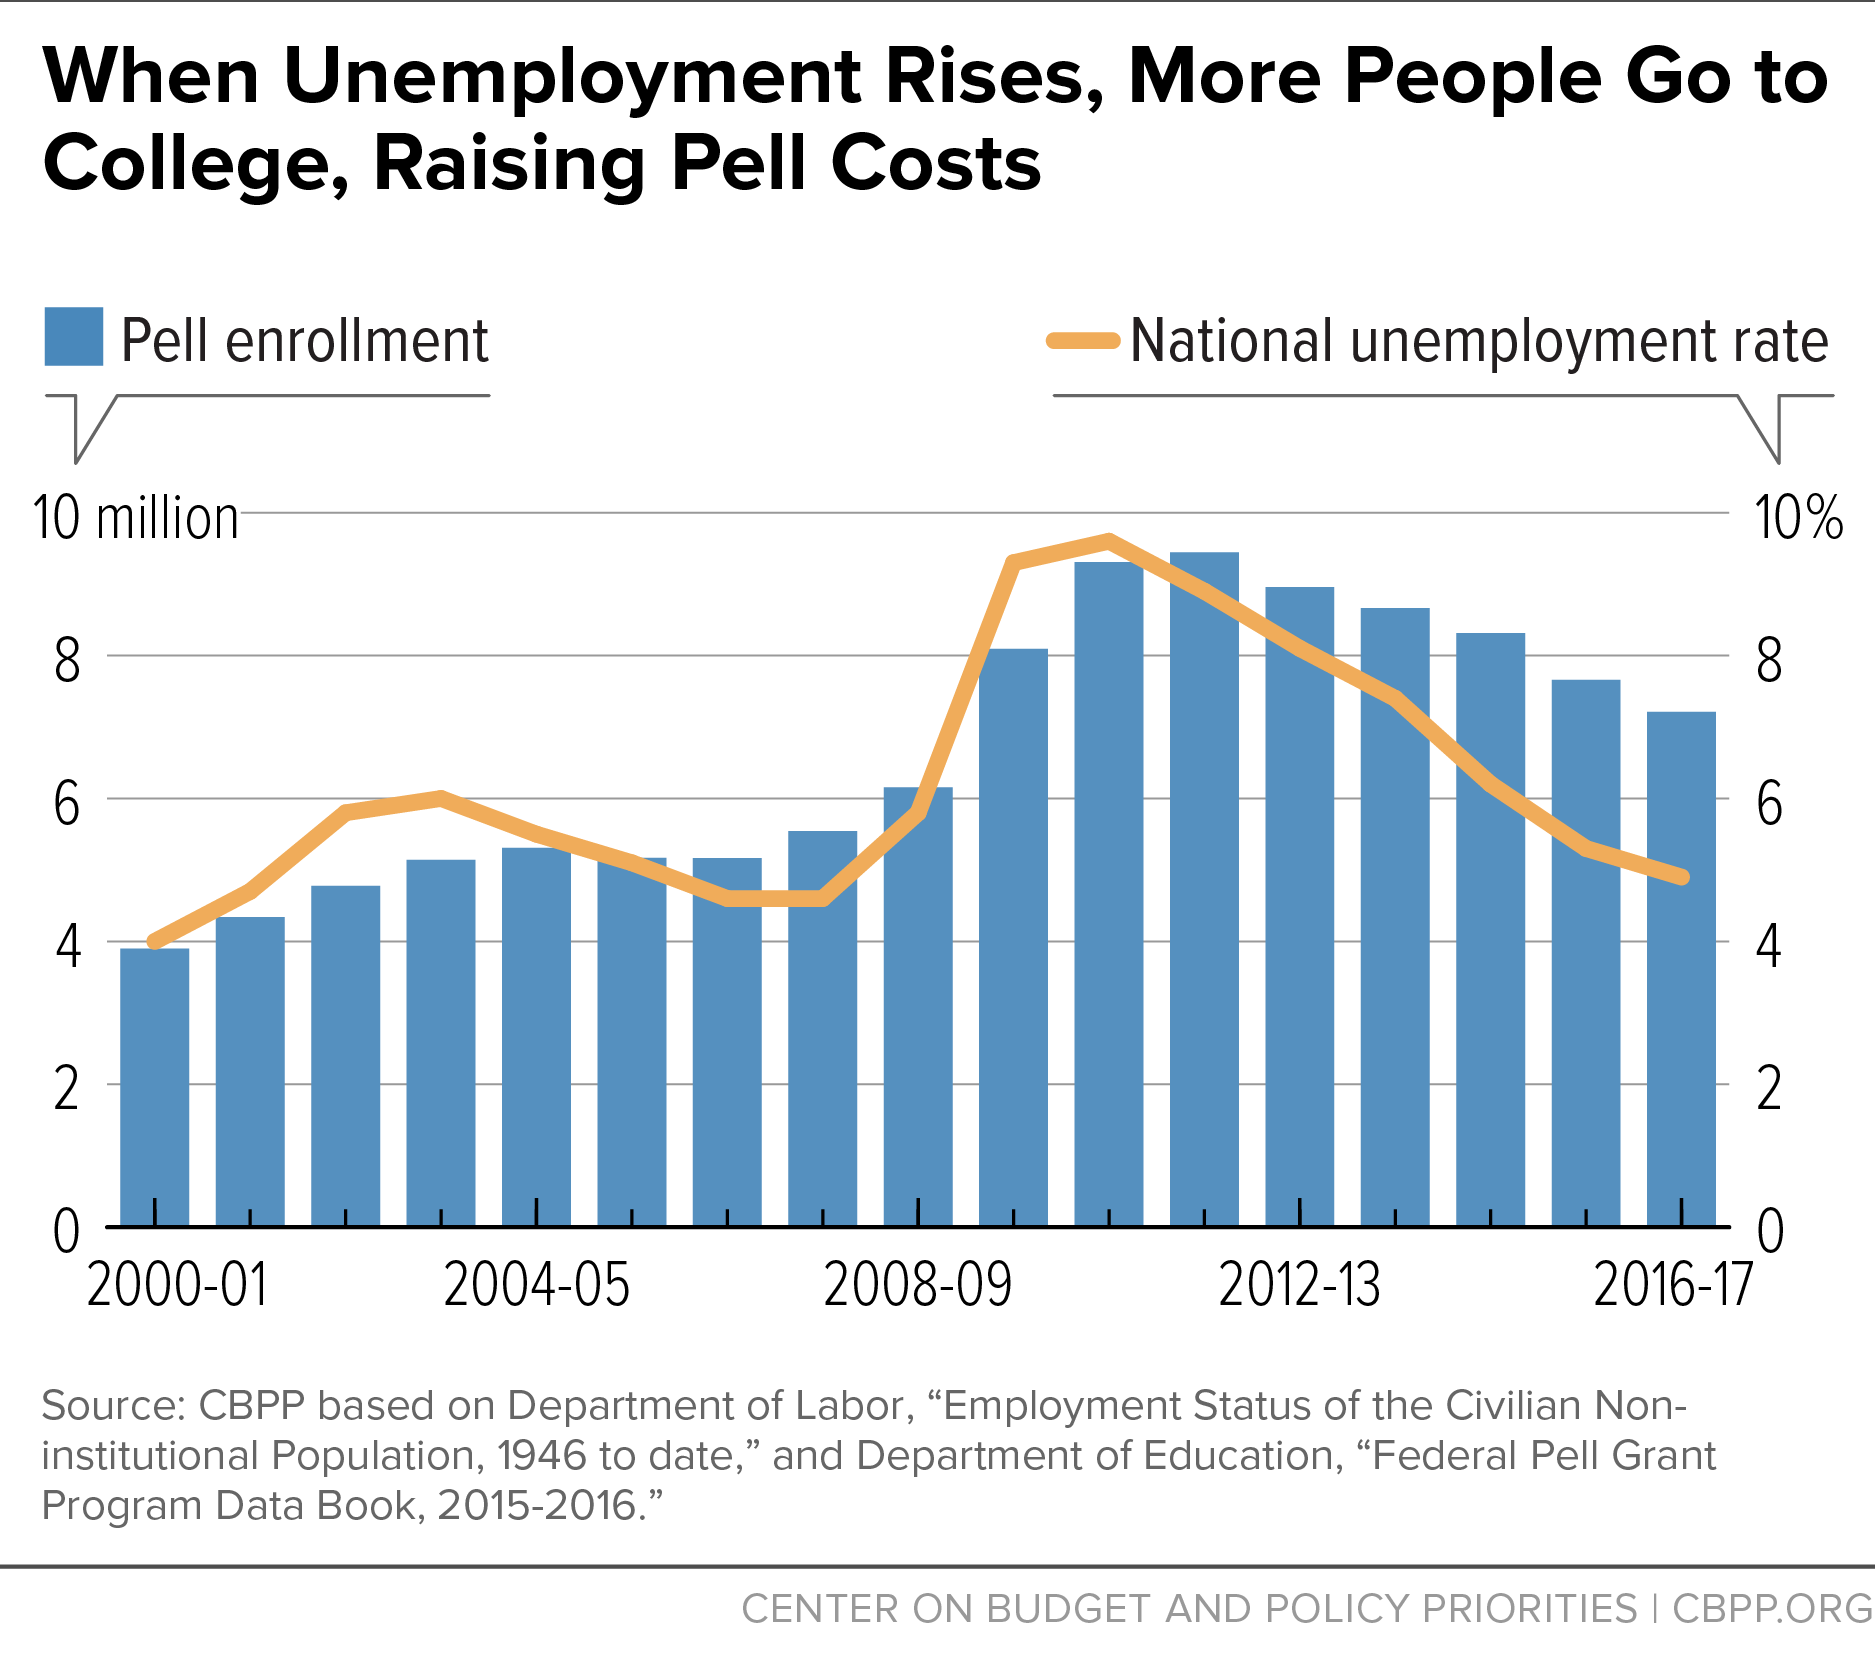 When Unemployment Rises, More People Go to College, Raising Pell Costs